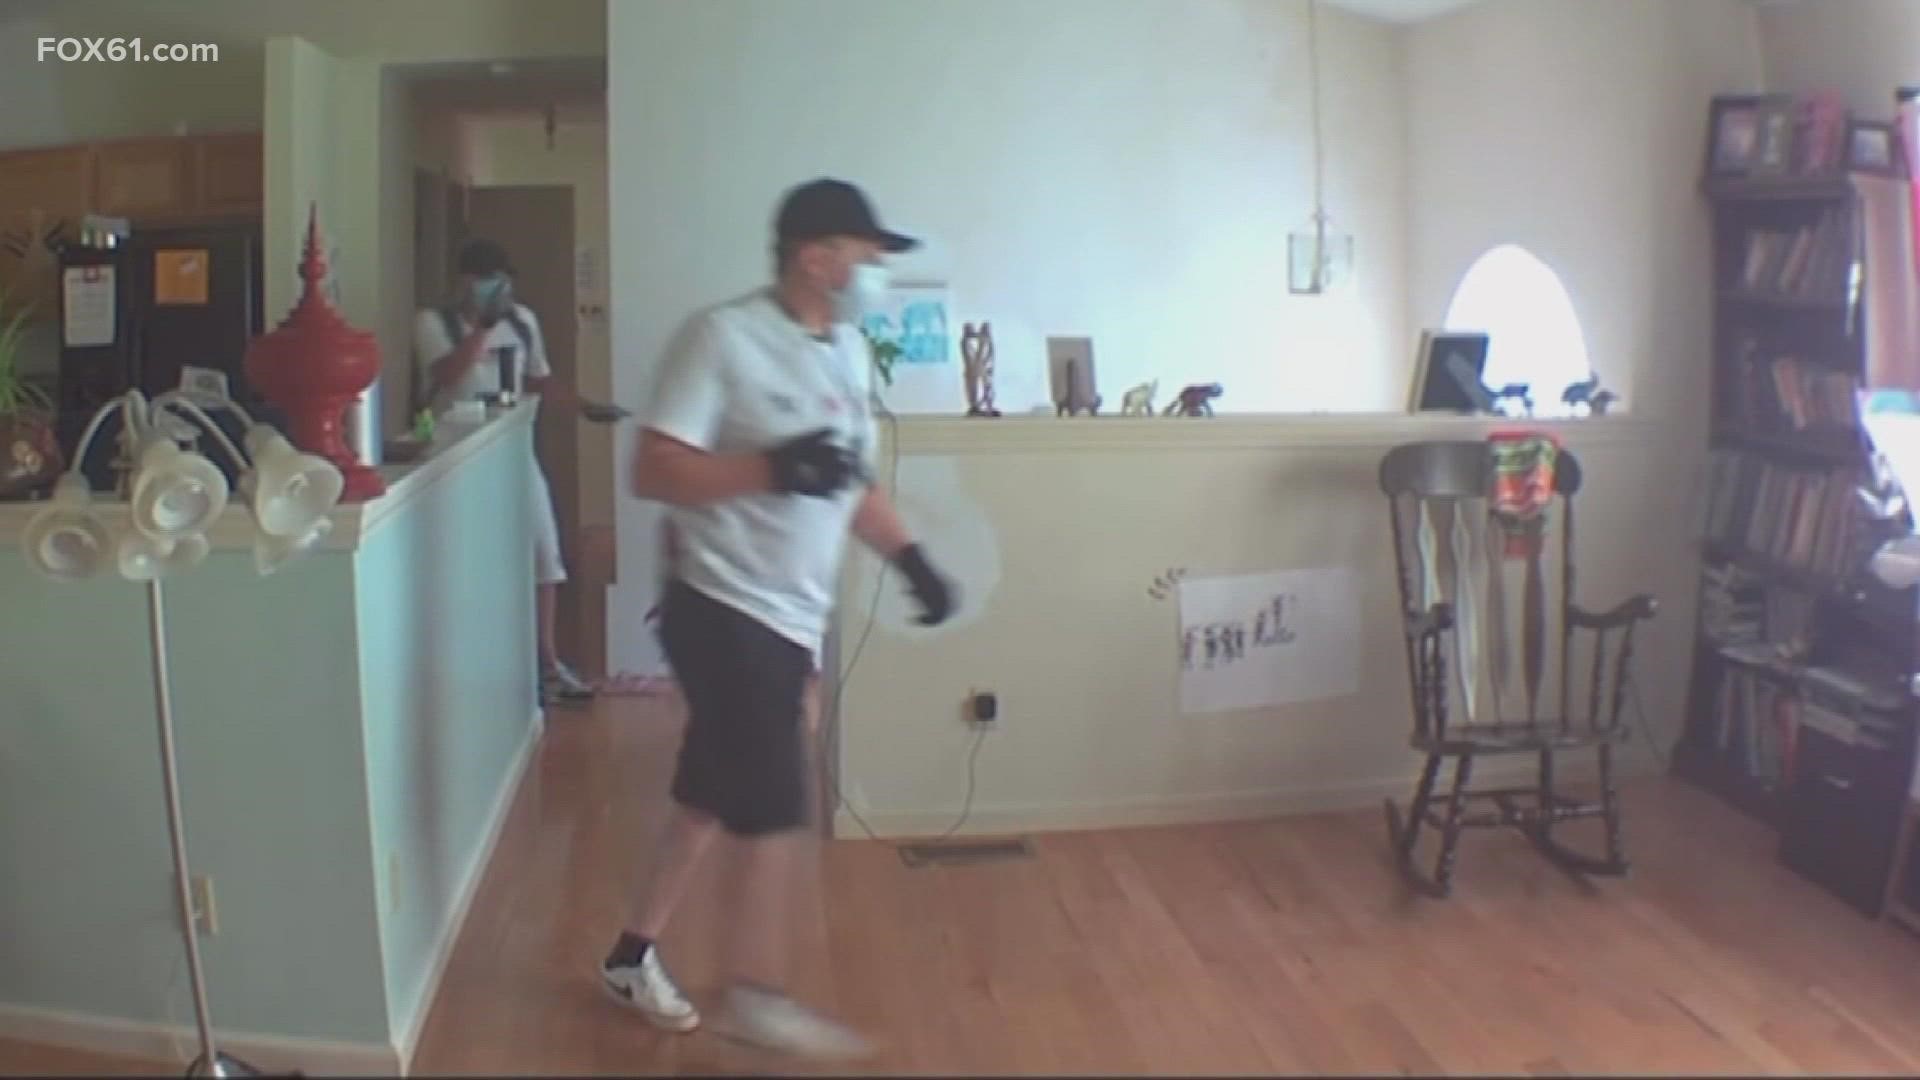 A video was uploaded to Facebook by the Naugatuck Police Department revealing footage from the burglary.